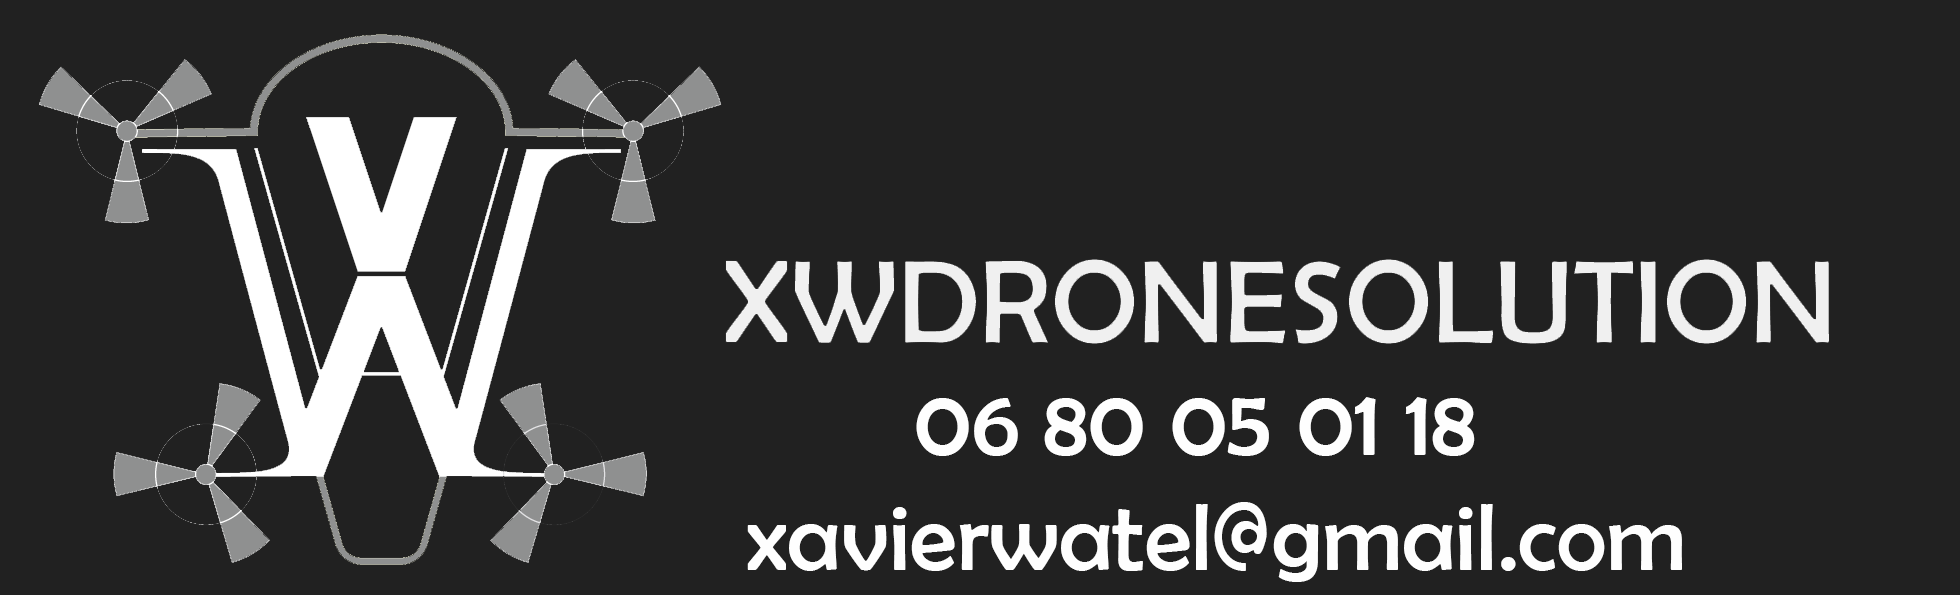 XW DRONE SOLUTION